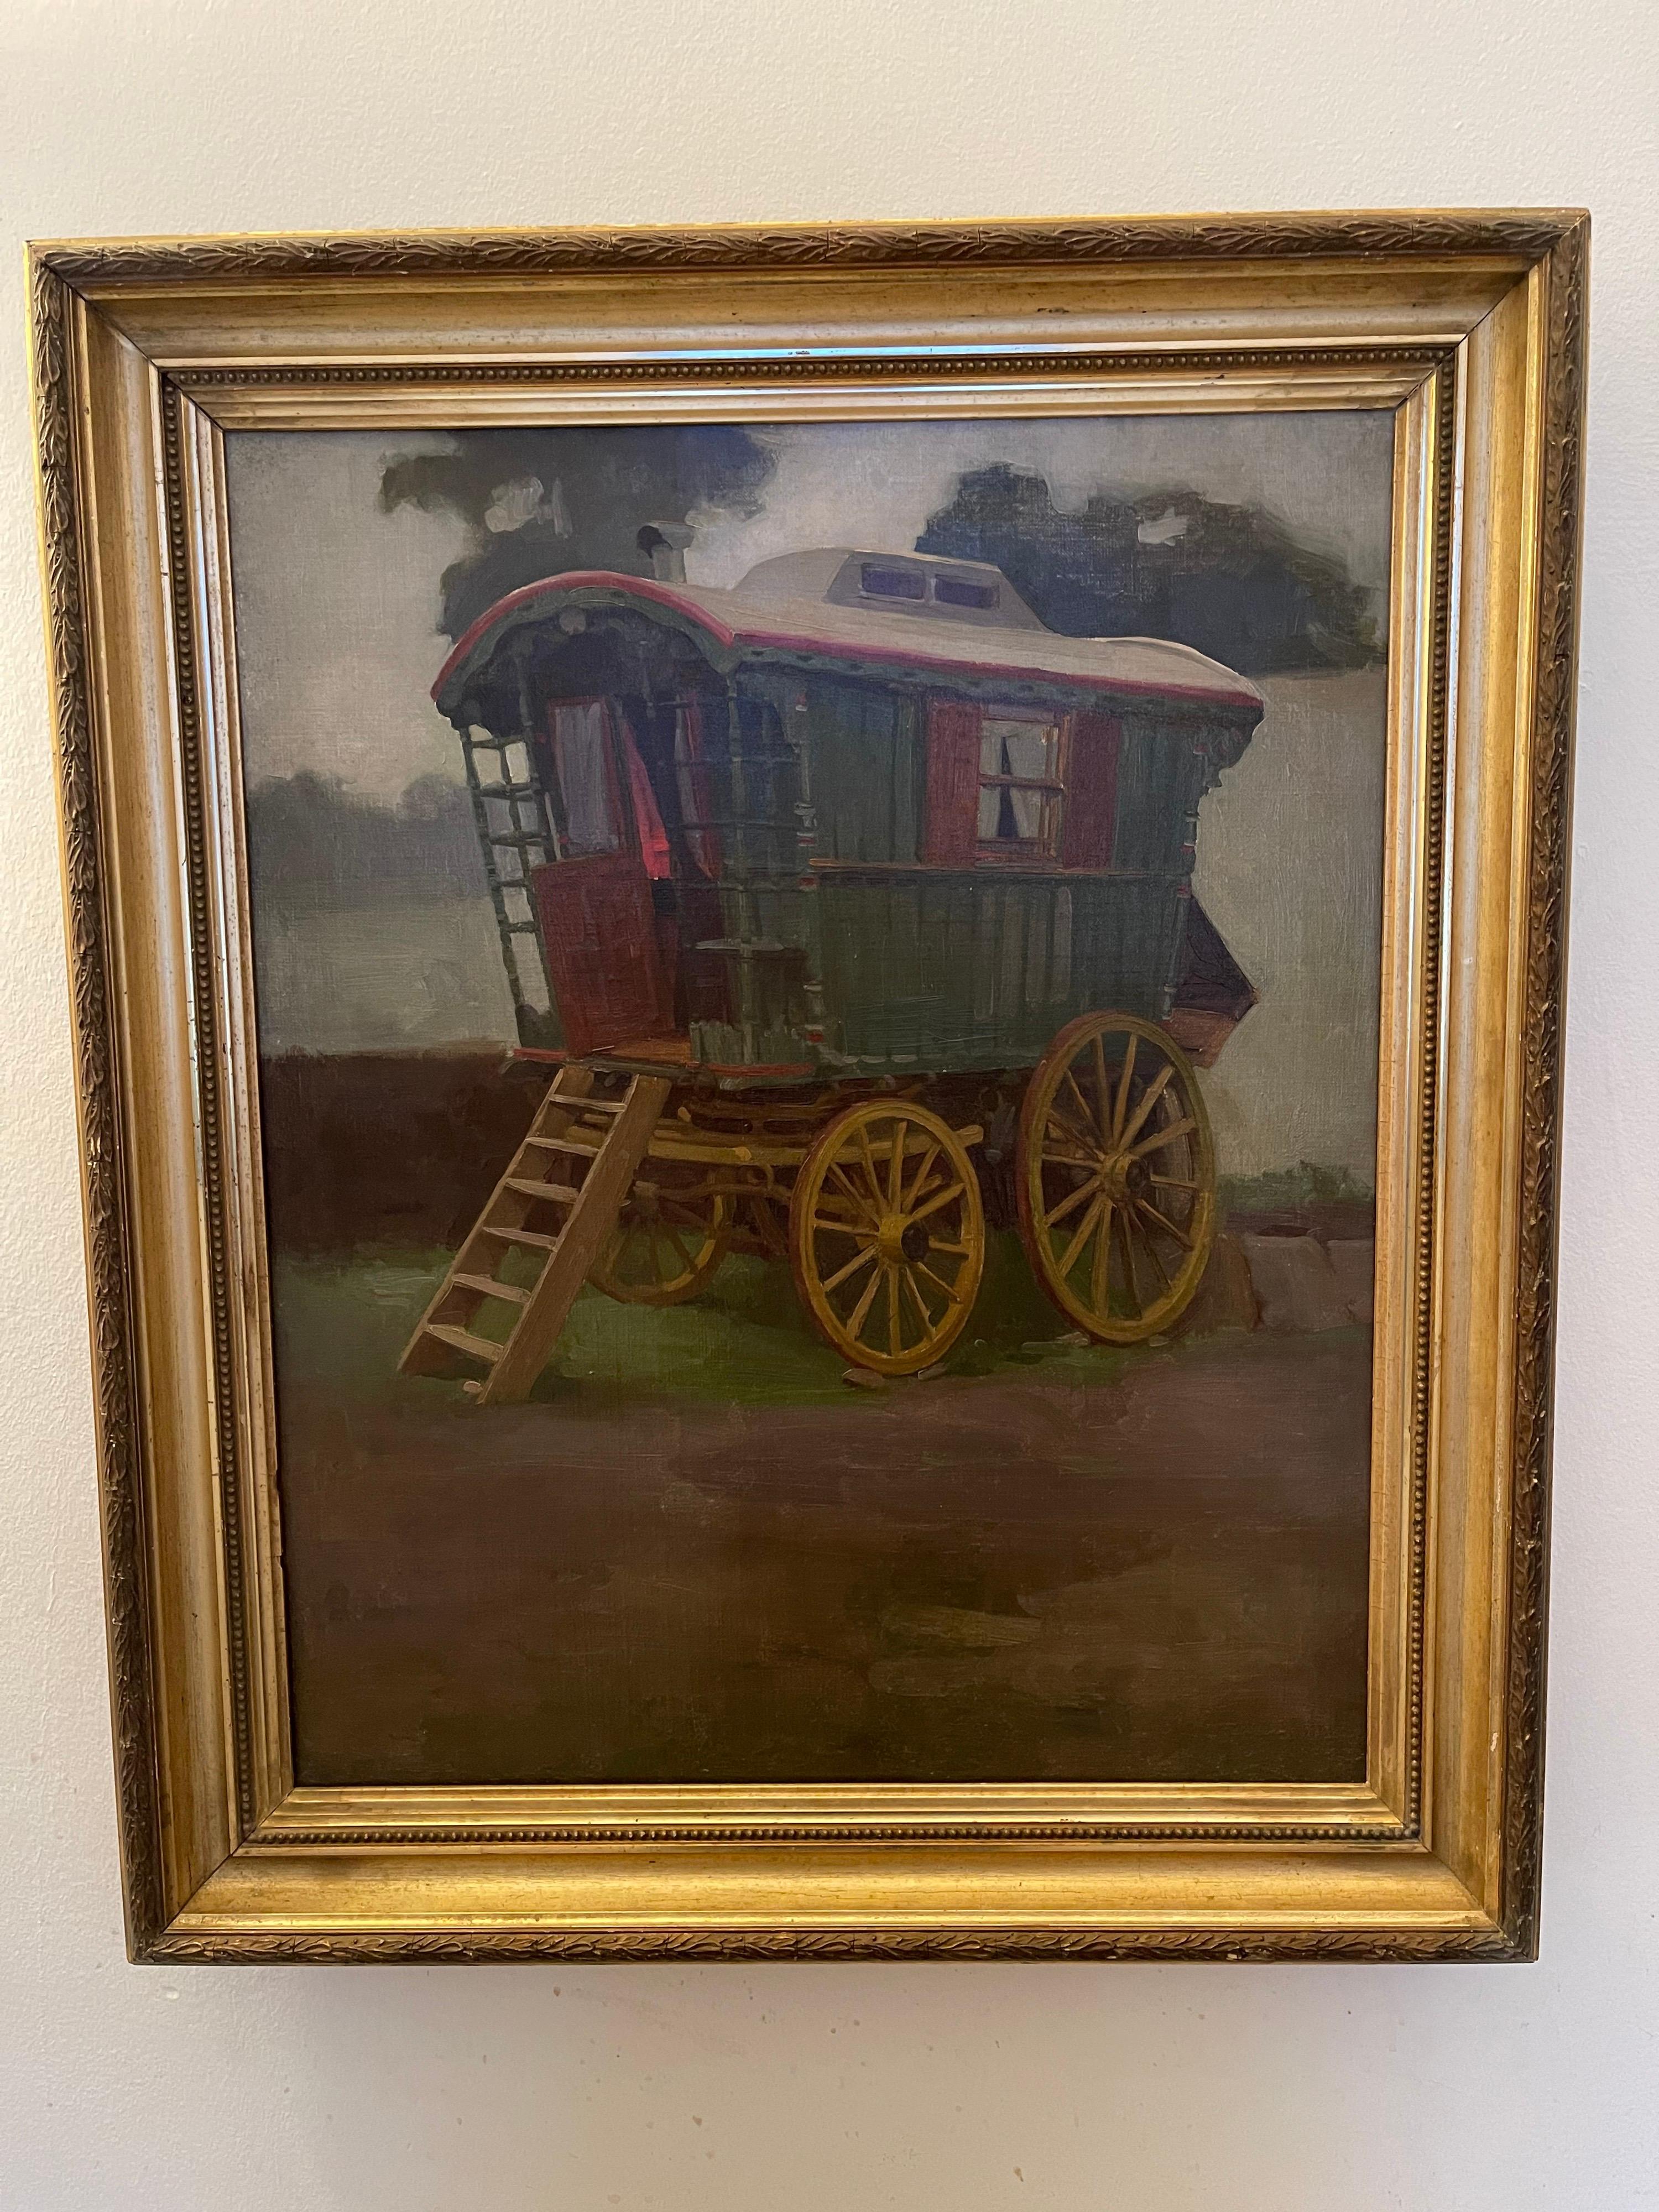 The gypsy caravan - Brown Figurative Painting by Ralph Middleton Todd